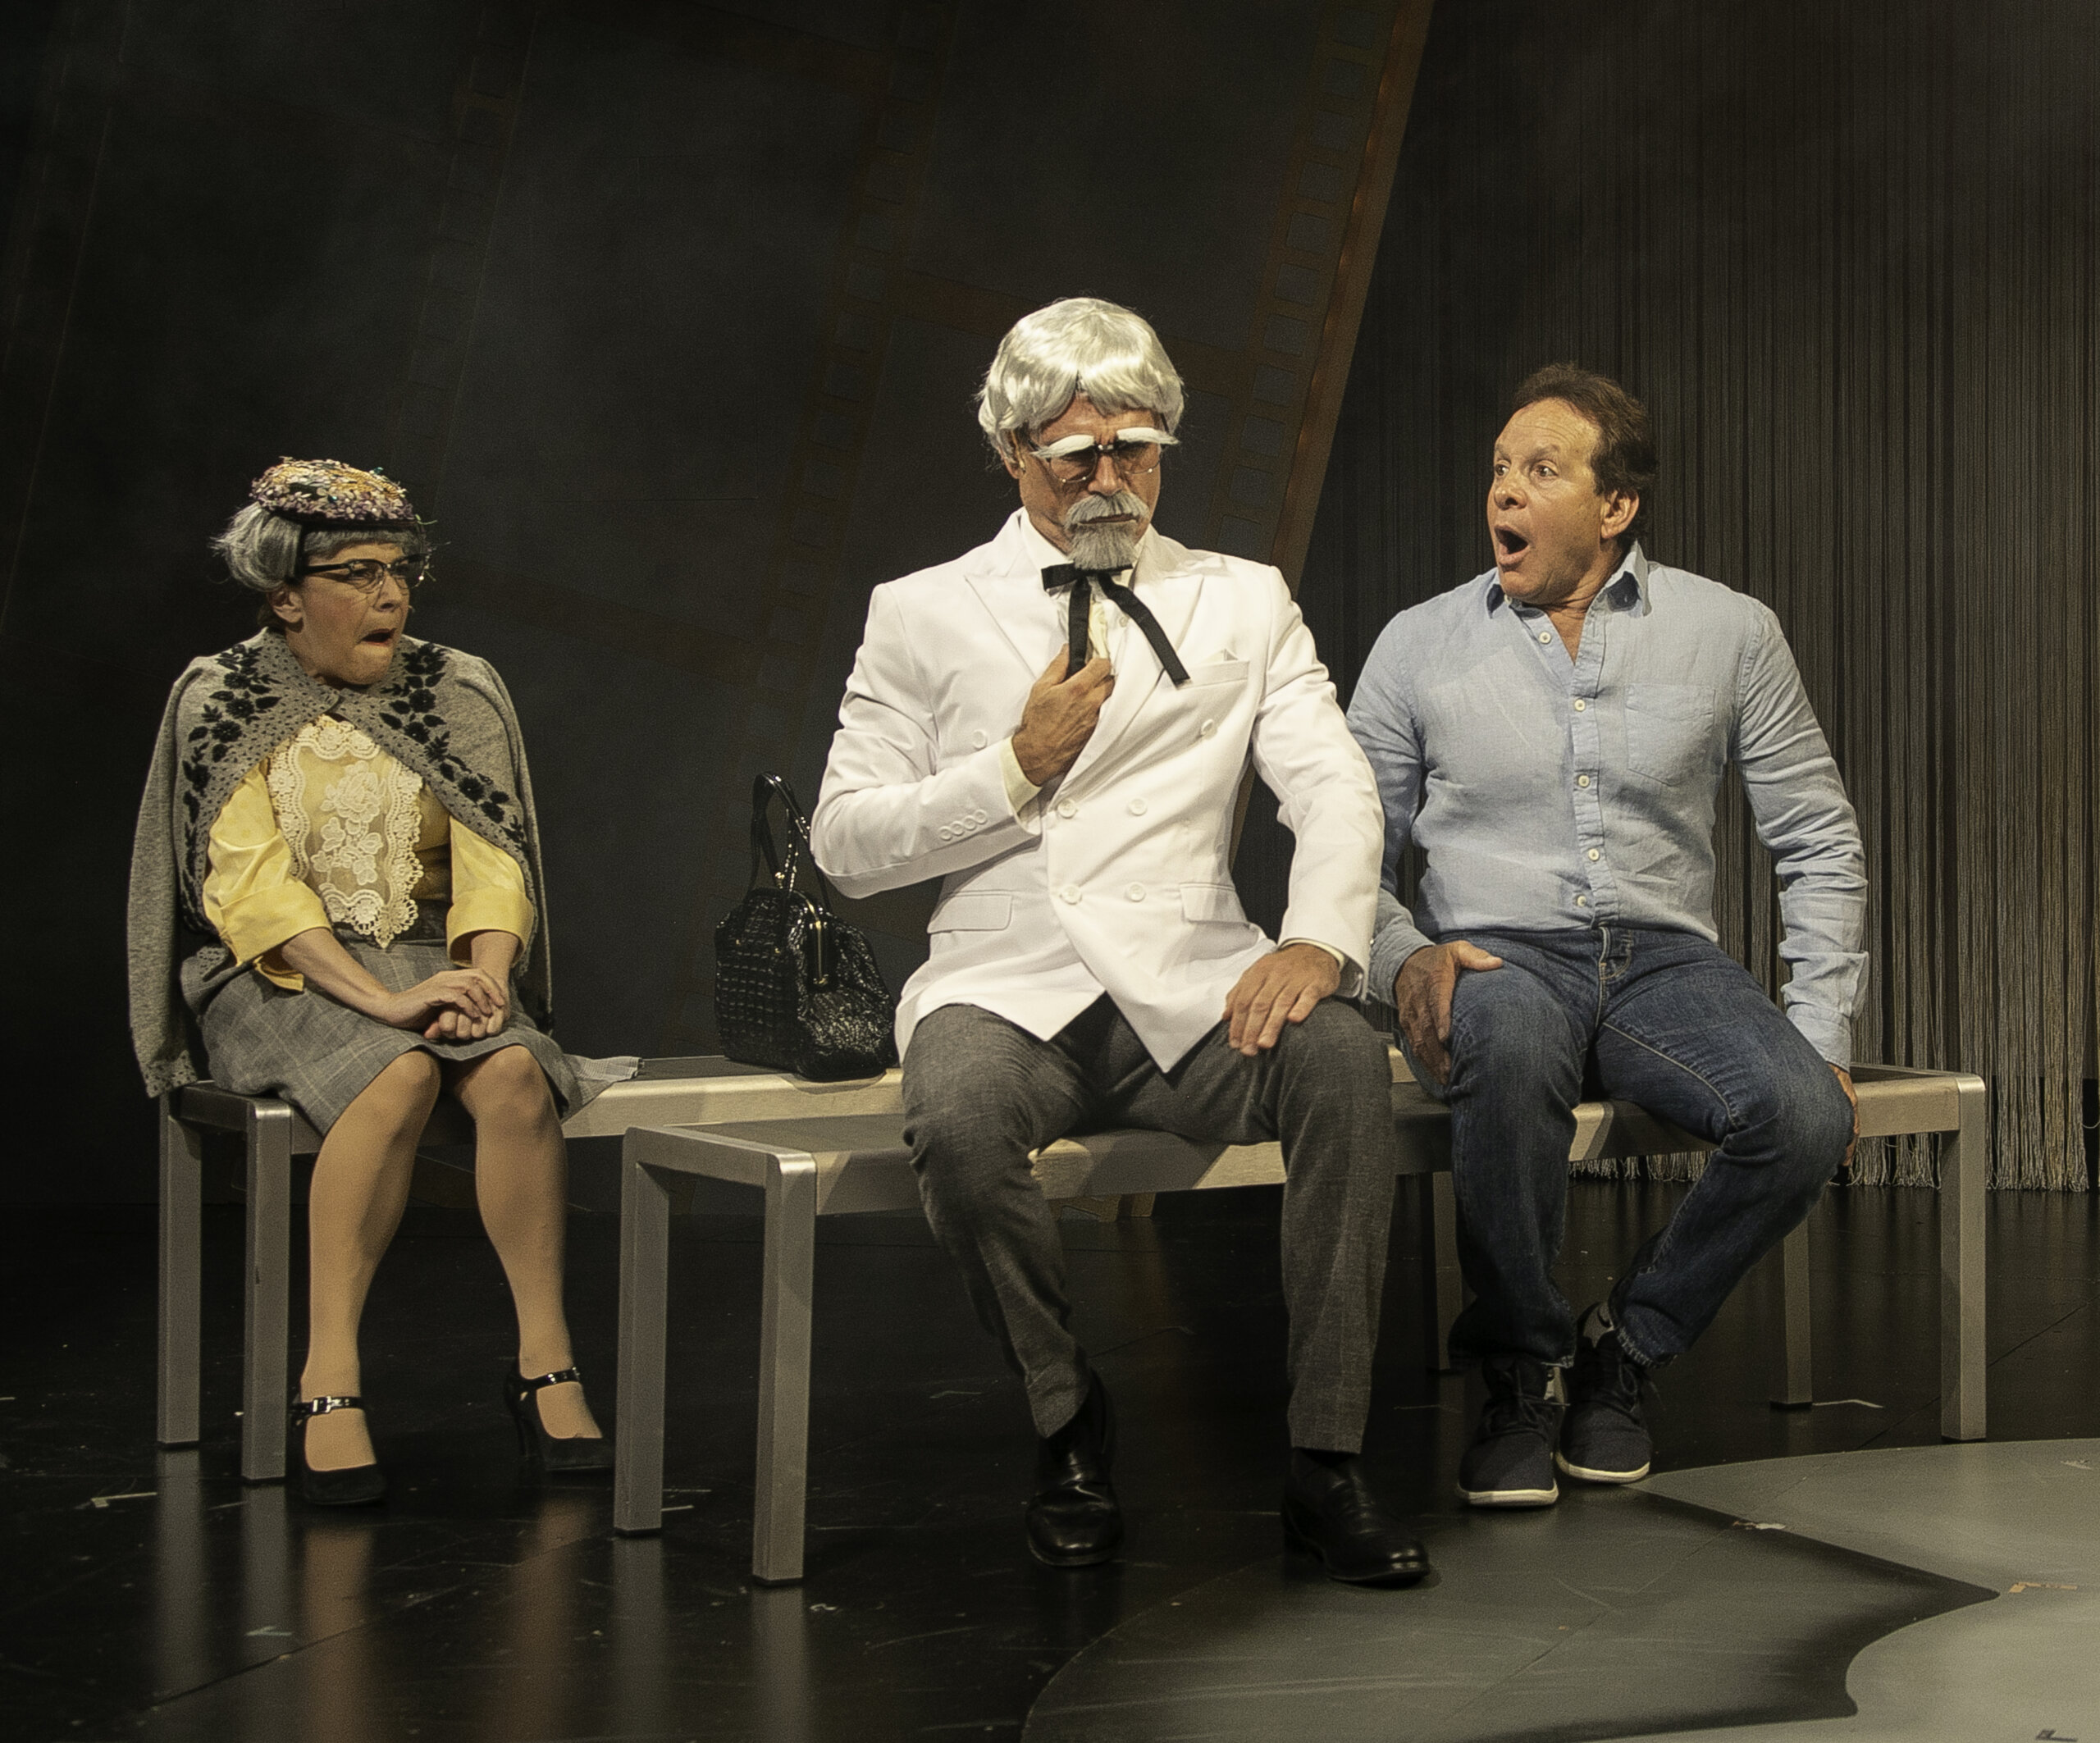 Carine Montbertrand, Dan Domingues and Steve Guttenberg in "Tales from the Guttenberg Bible" at Bay Street Theater